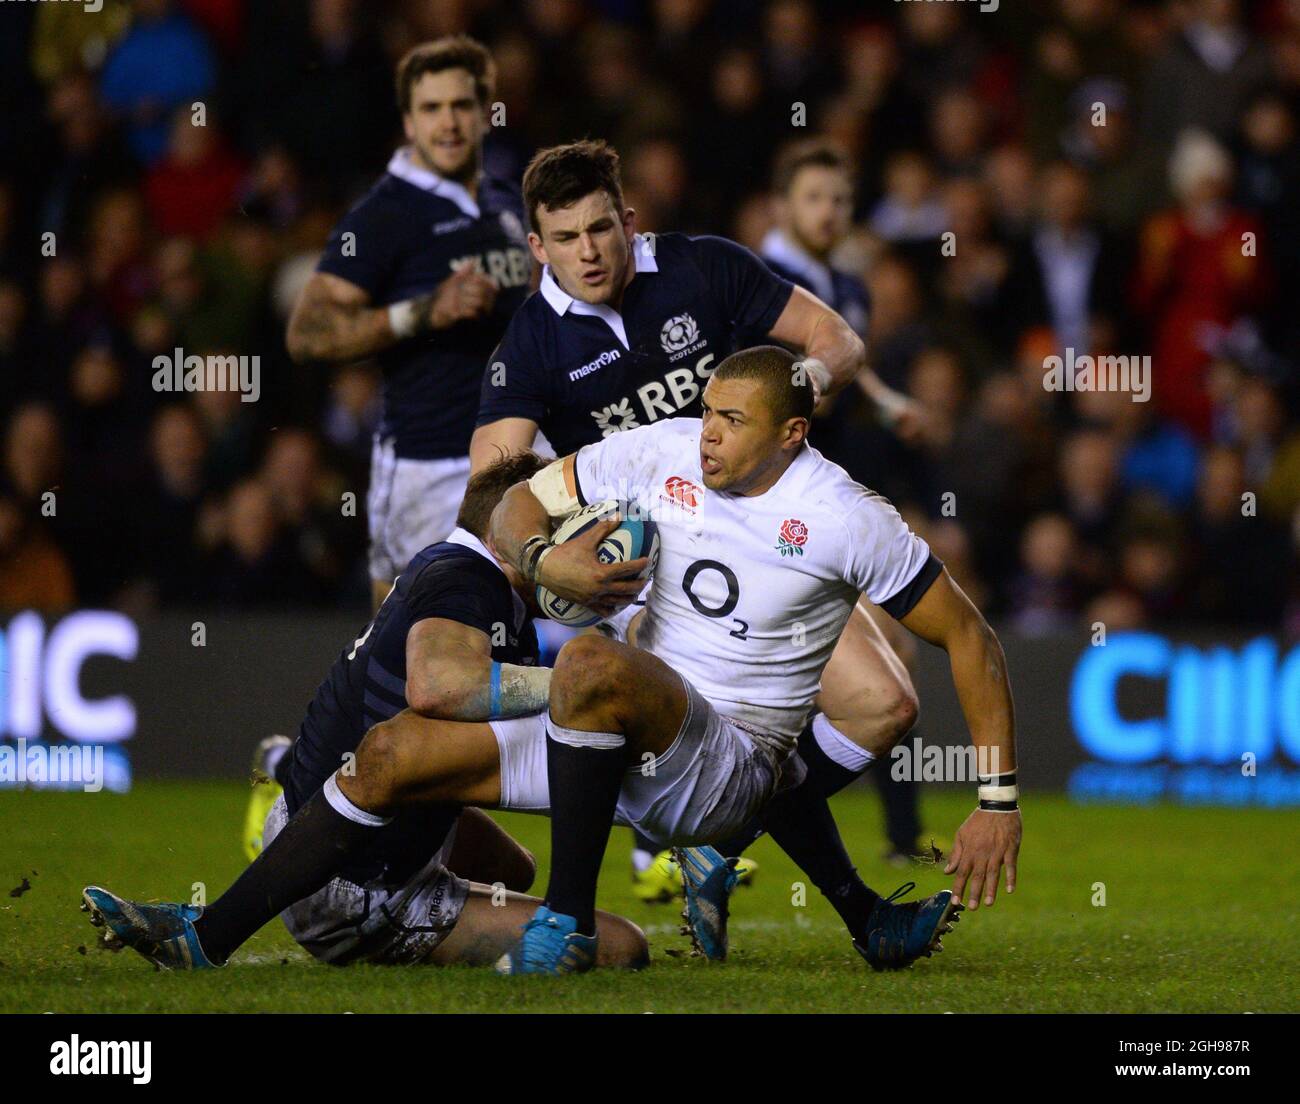 Luther Burrell of England in action during the RBS 6Nations match between Scotland and England at Murrayfield Stadium, Edinburgh on February 8, 2014. Stock Photo